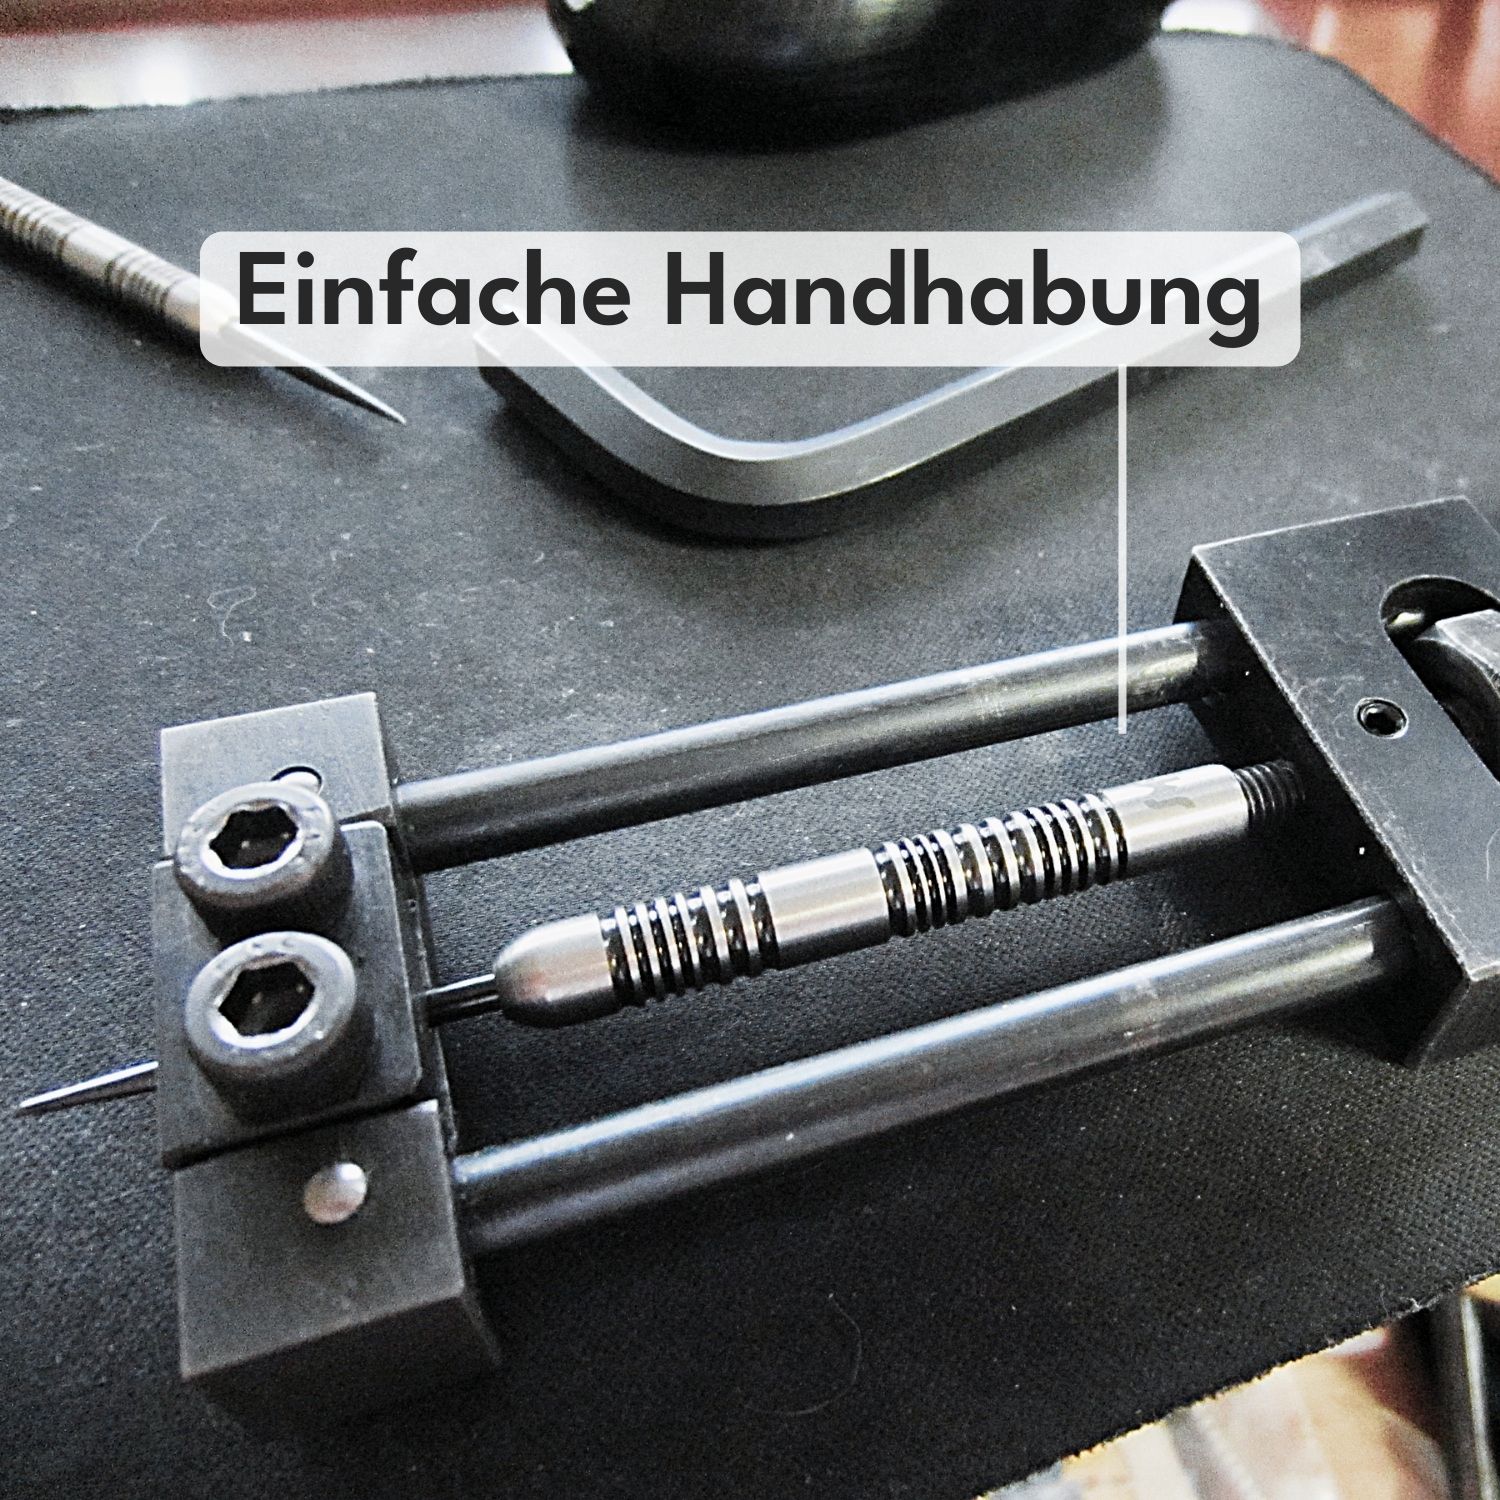 Dart tip changing machine - darts repointing tool for changing dart tips